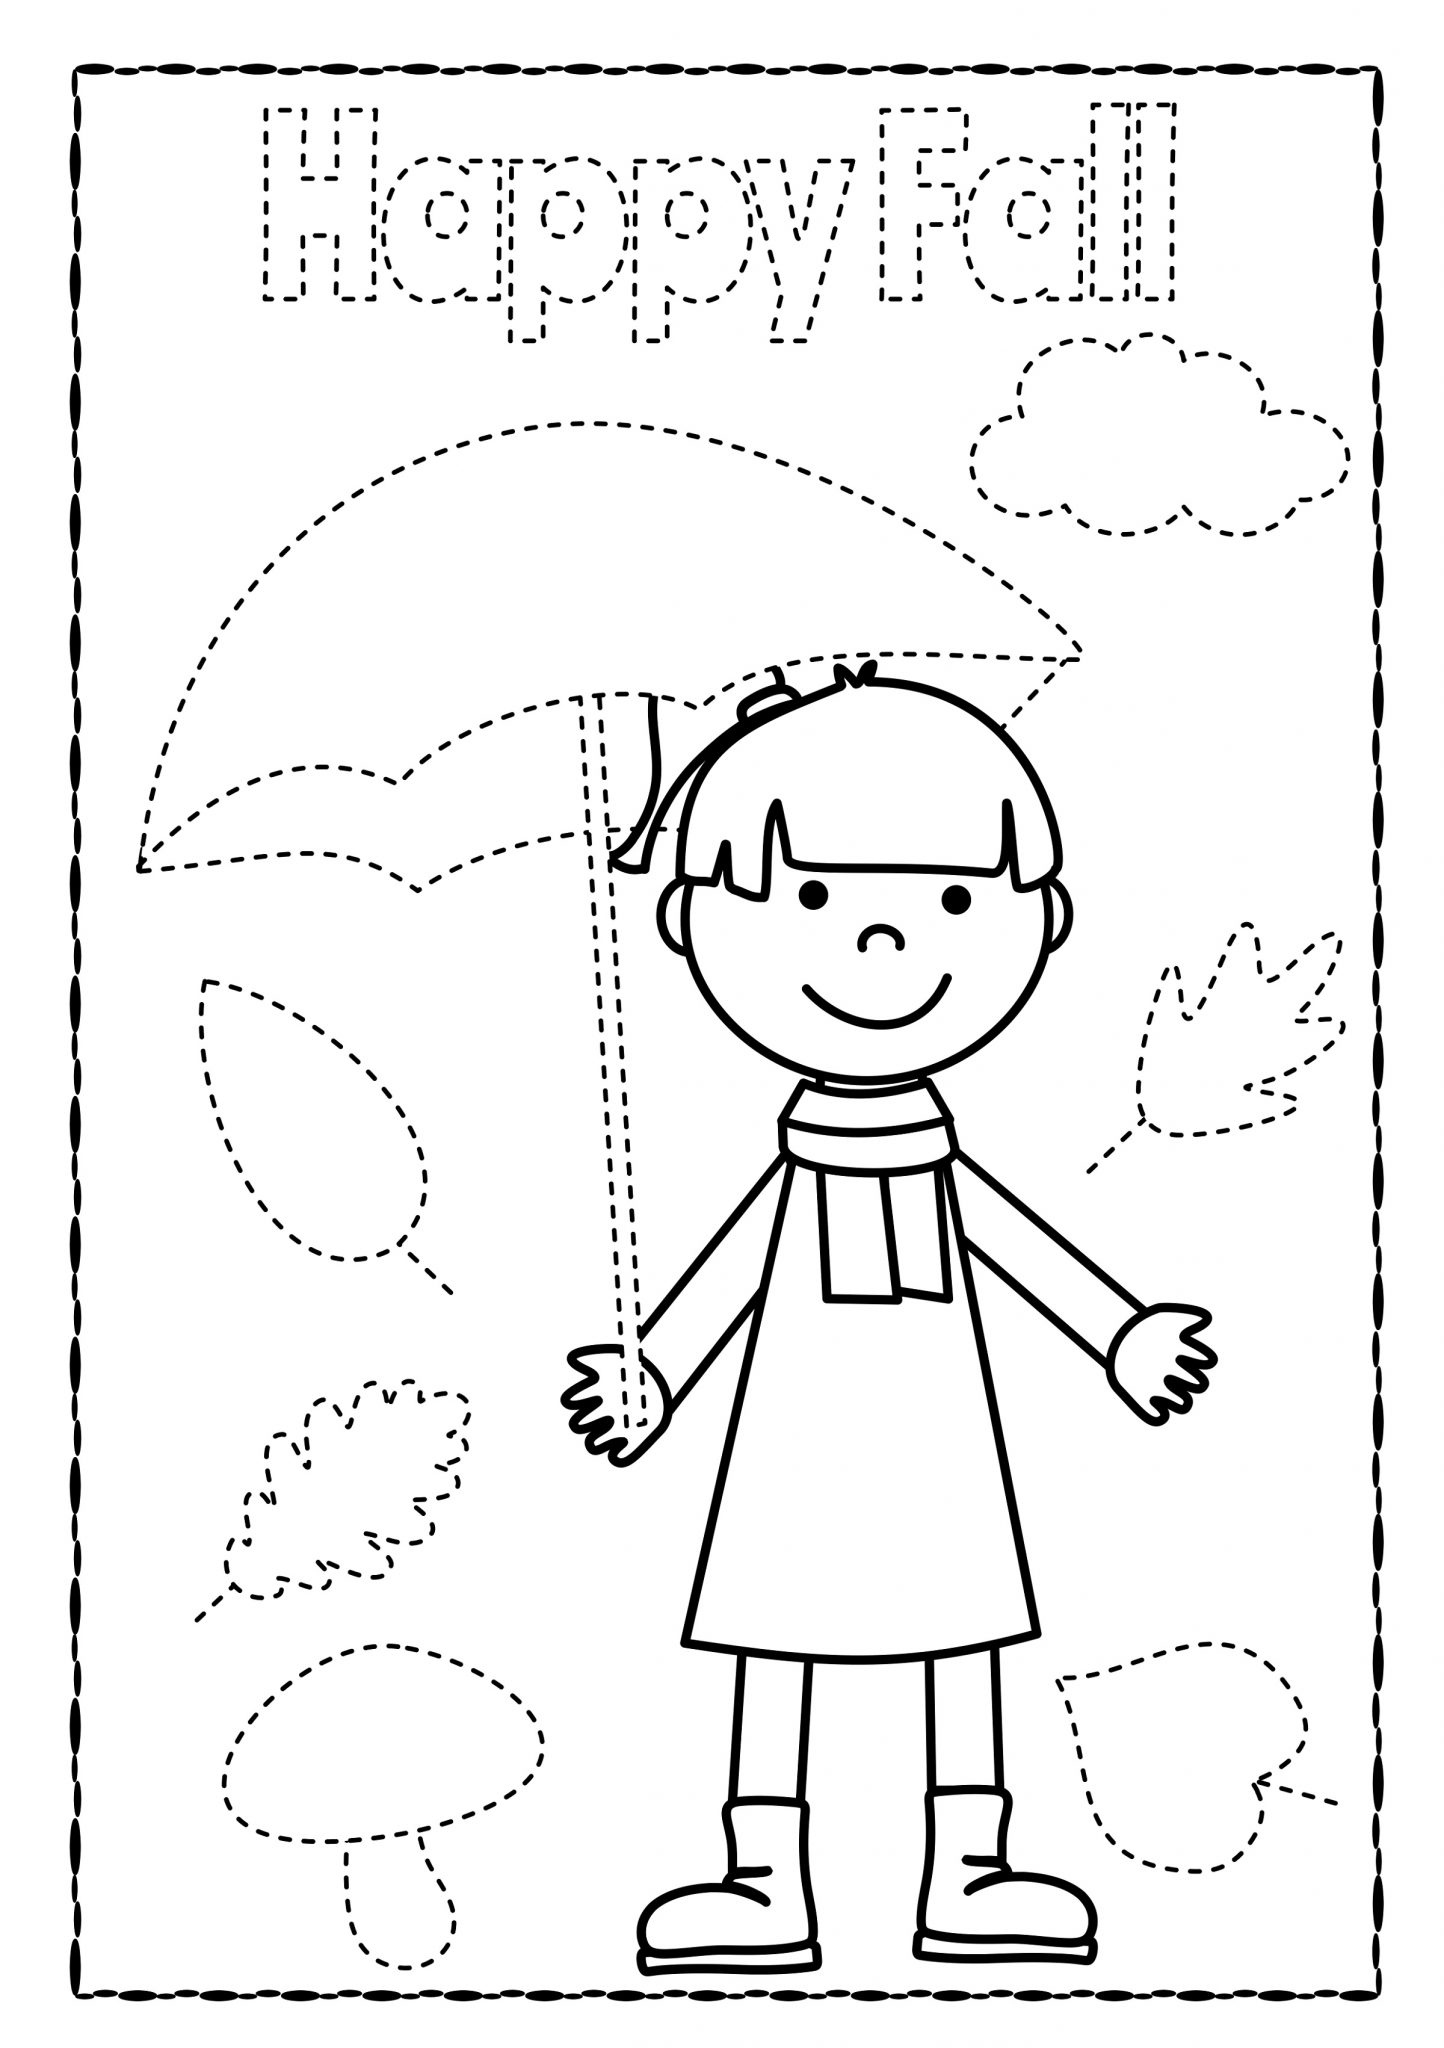 free-abc-tracing-worksheets-for-preschool-abc-tracing-worksheets